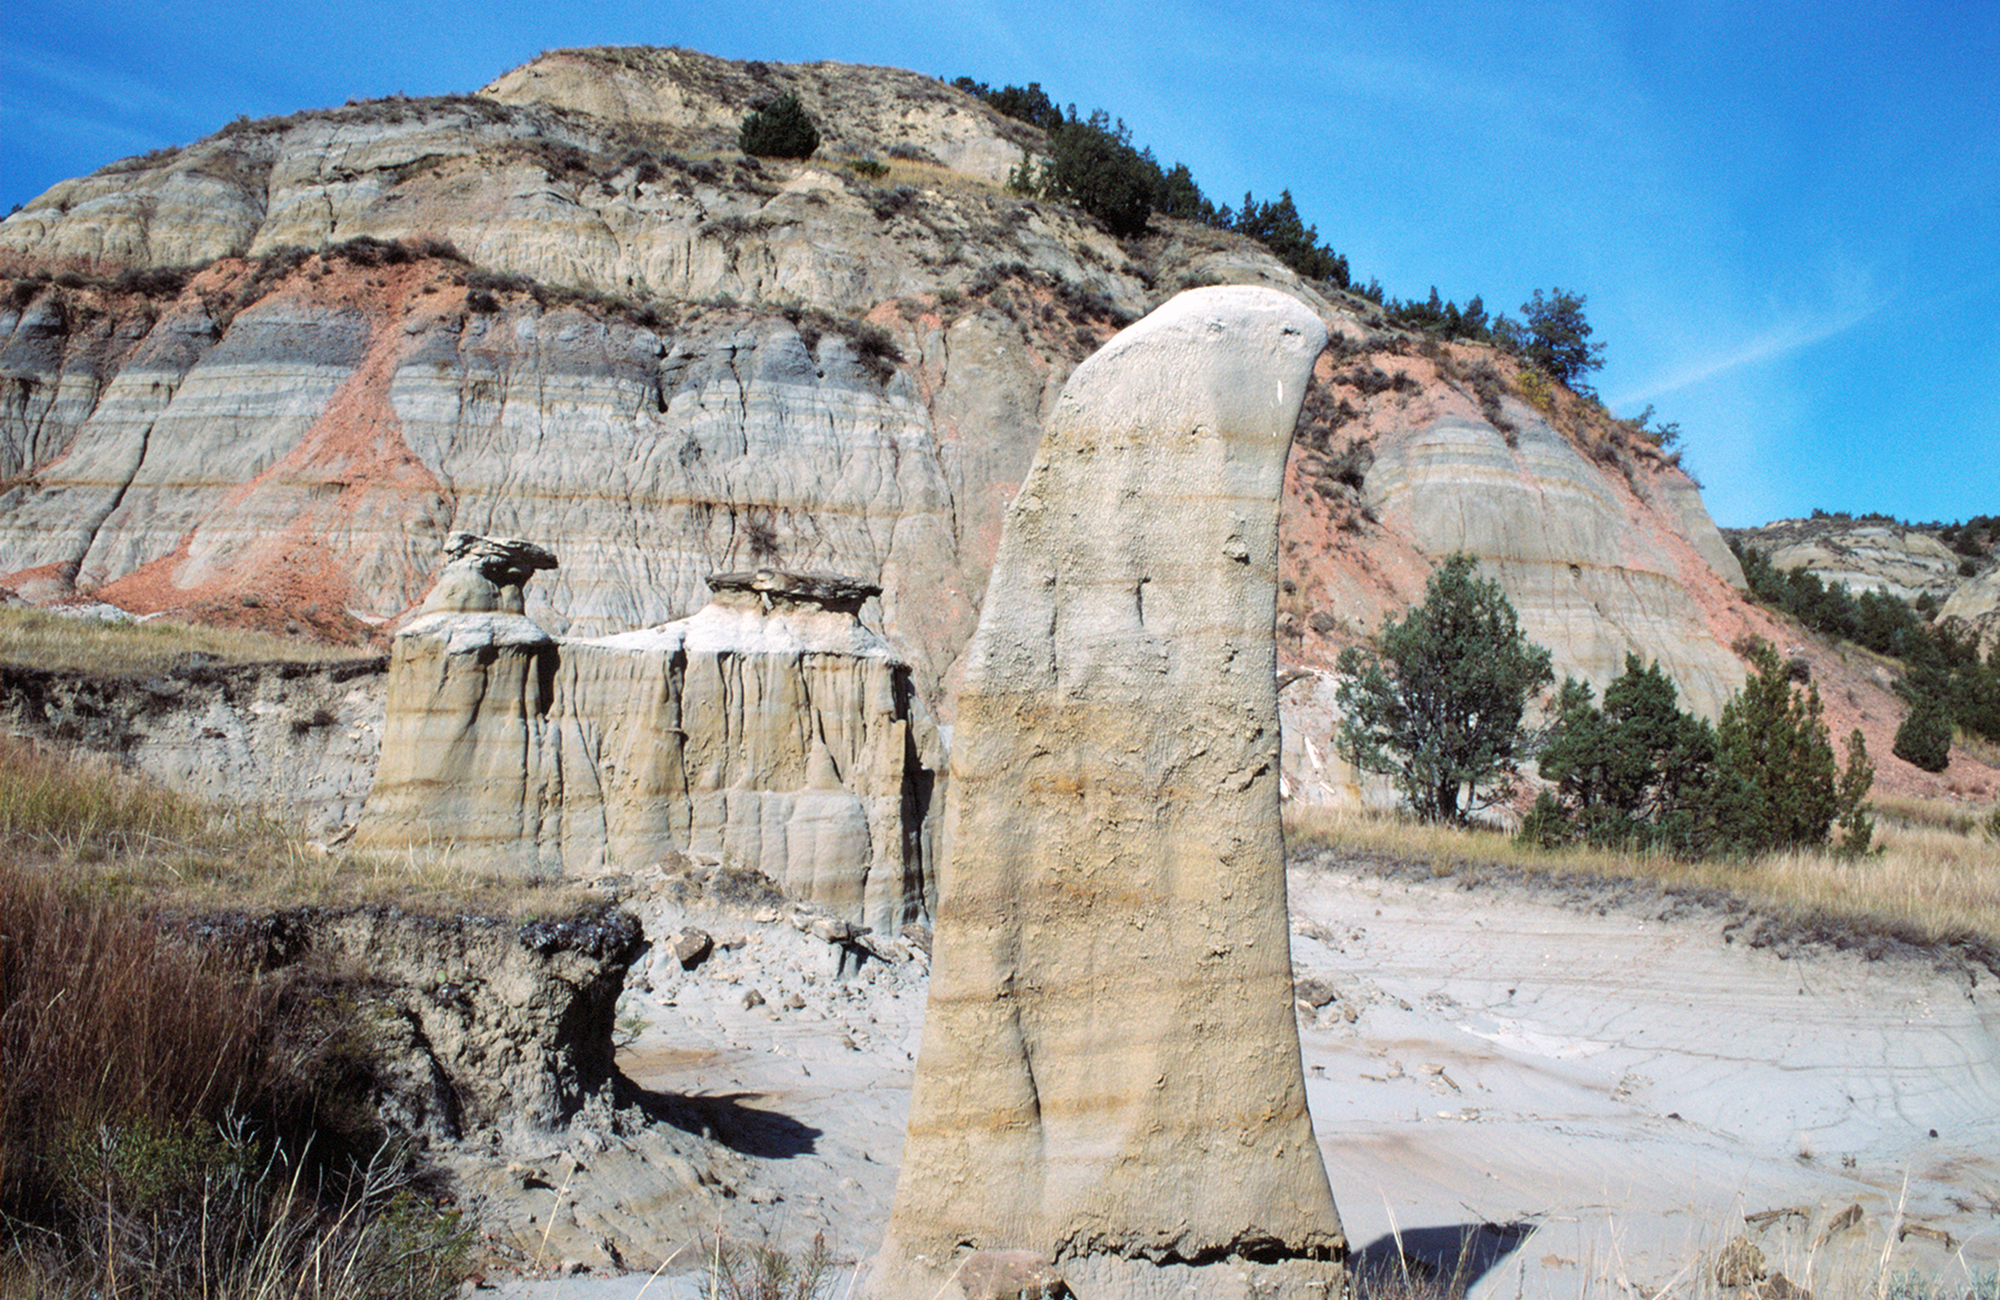 Photo of the Badlands with separate small, weathered formations.